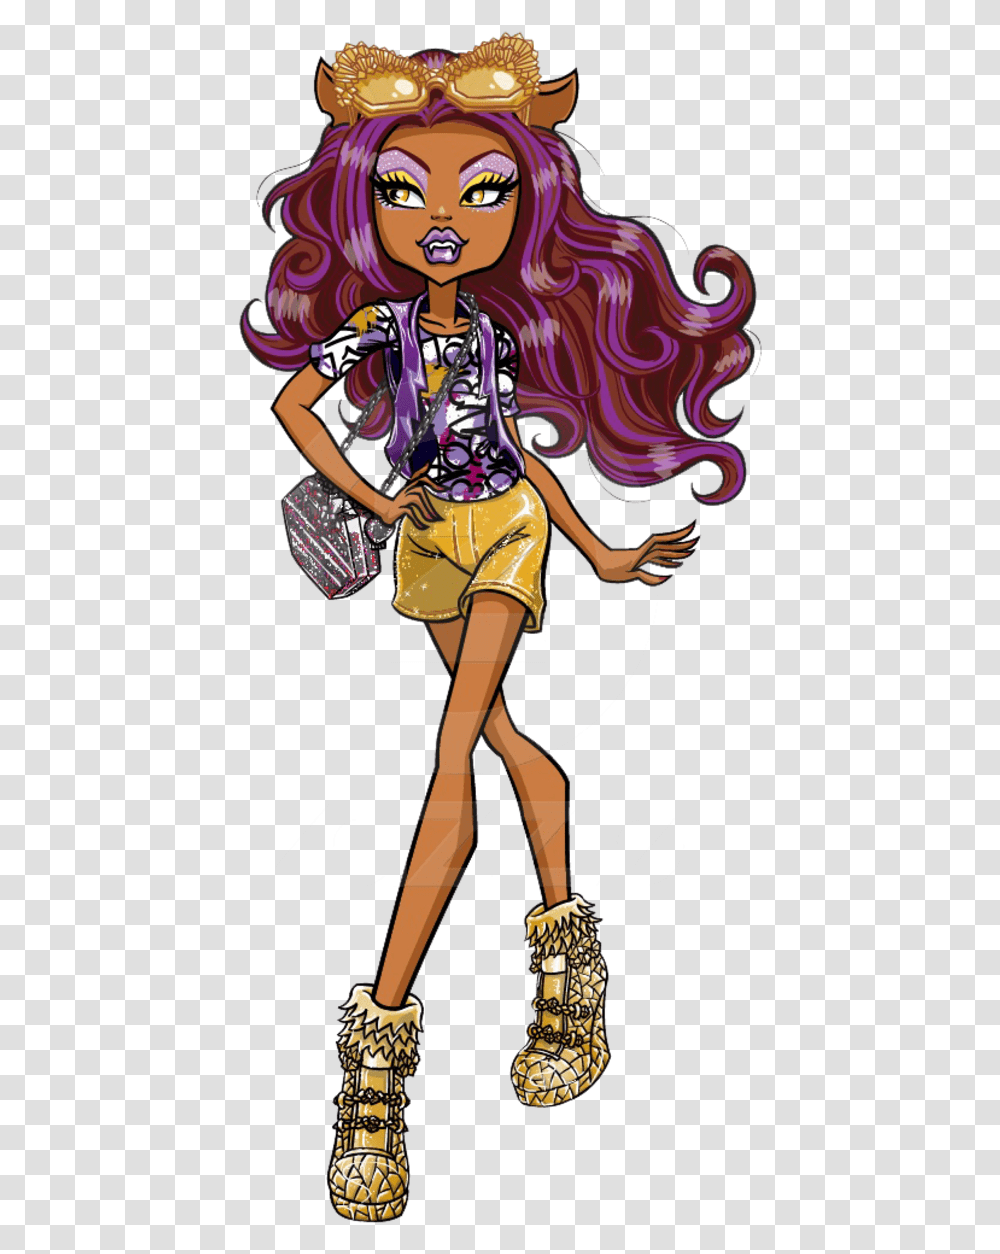 Clawdeen Boo York Monster High Dolls Draculaura And Clawd Wolf, Person Transparent Png